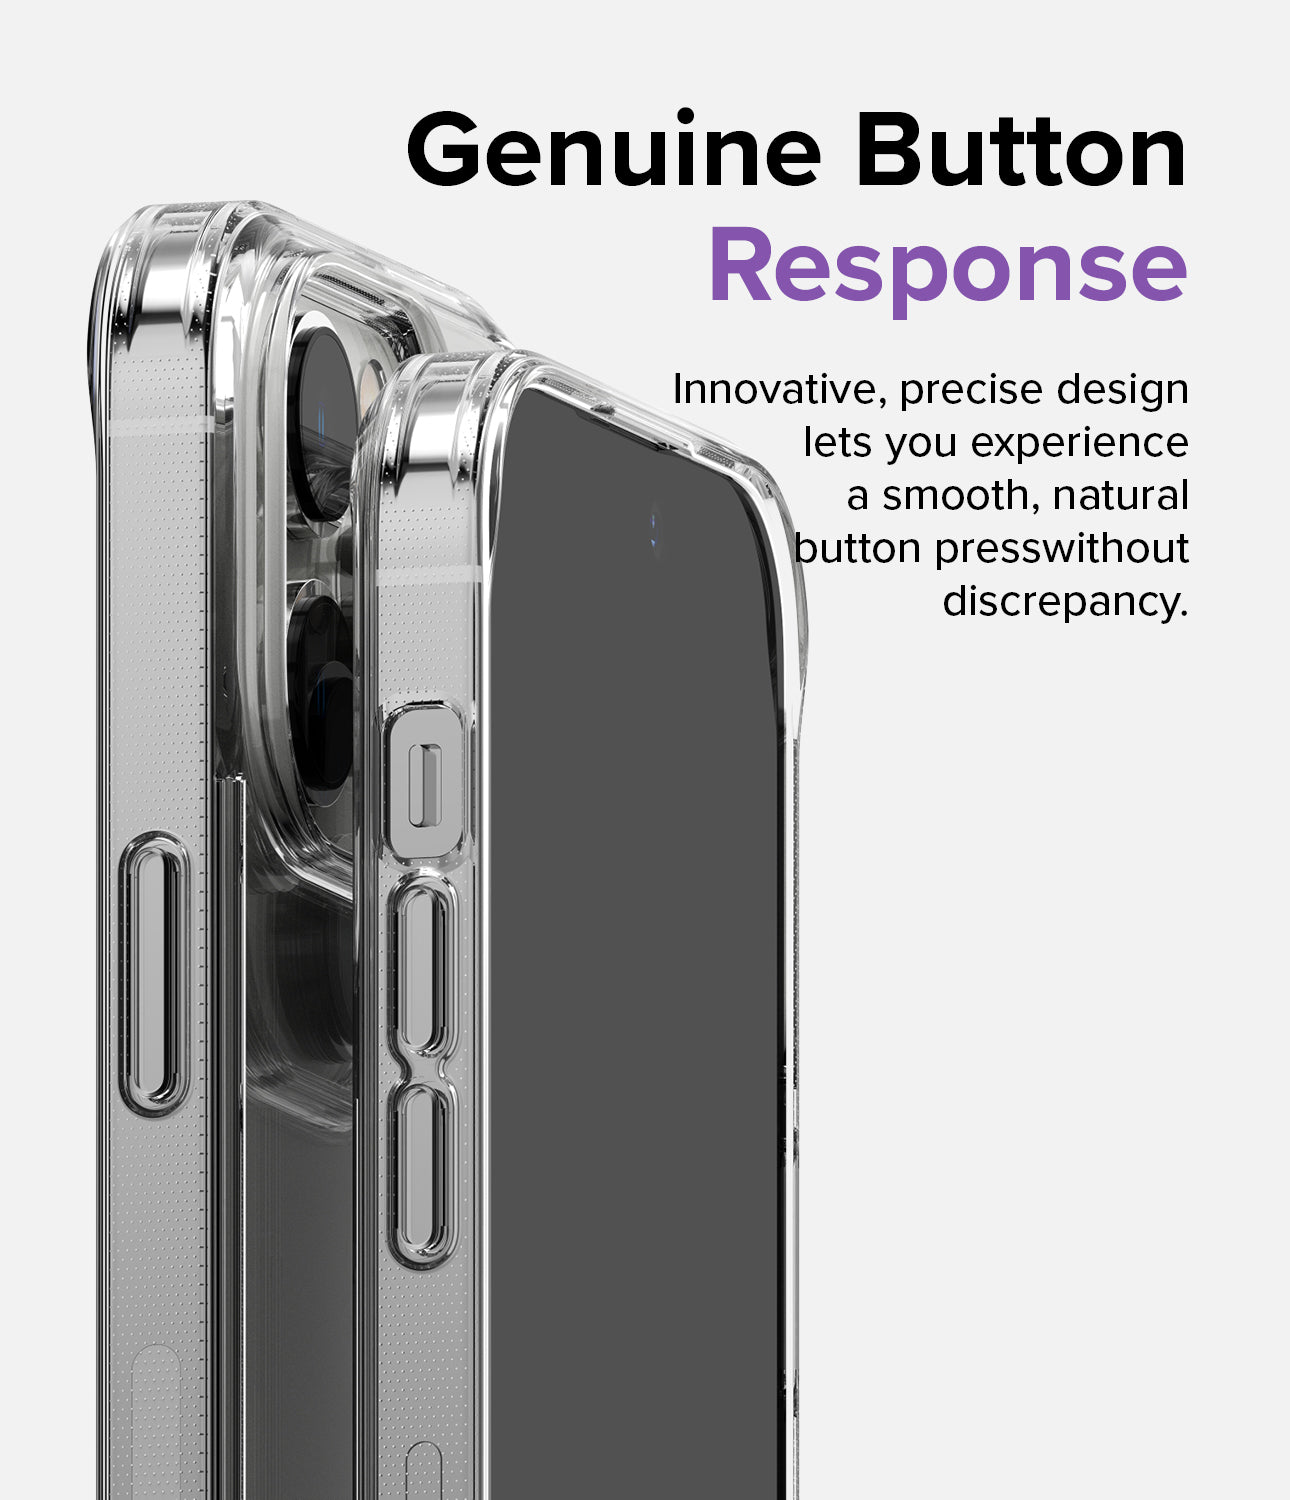 iPhone 14 Pro Max Case | Fusion - Genuine Button Response. Innovative, precise design lets you experience a smooth, natural button press without discrepancy.